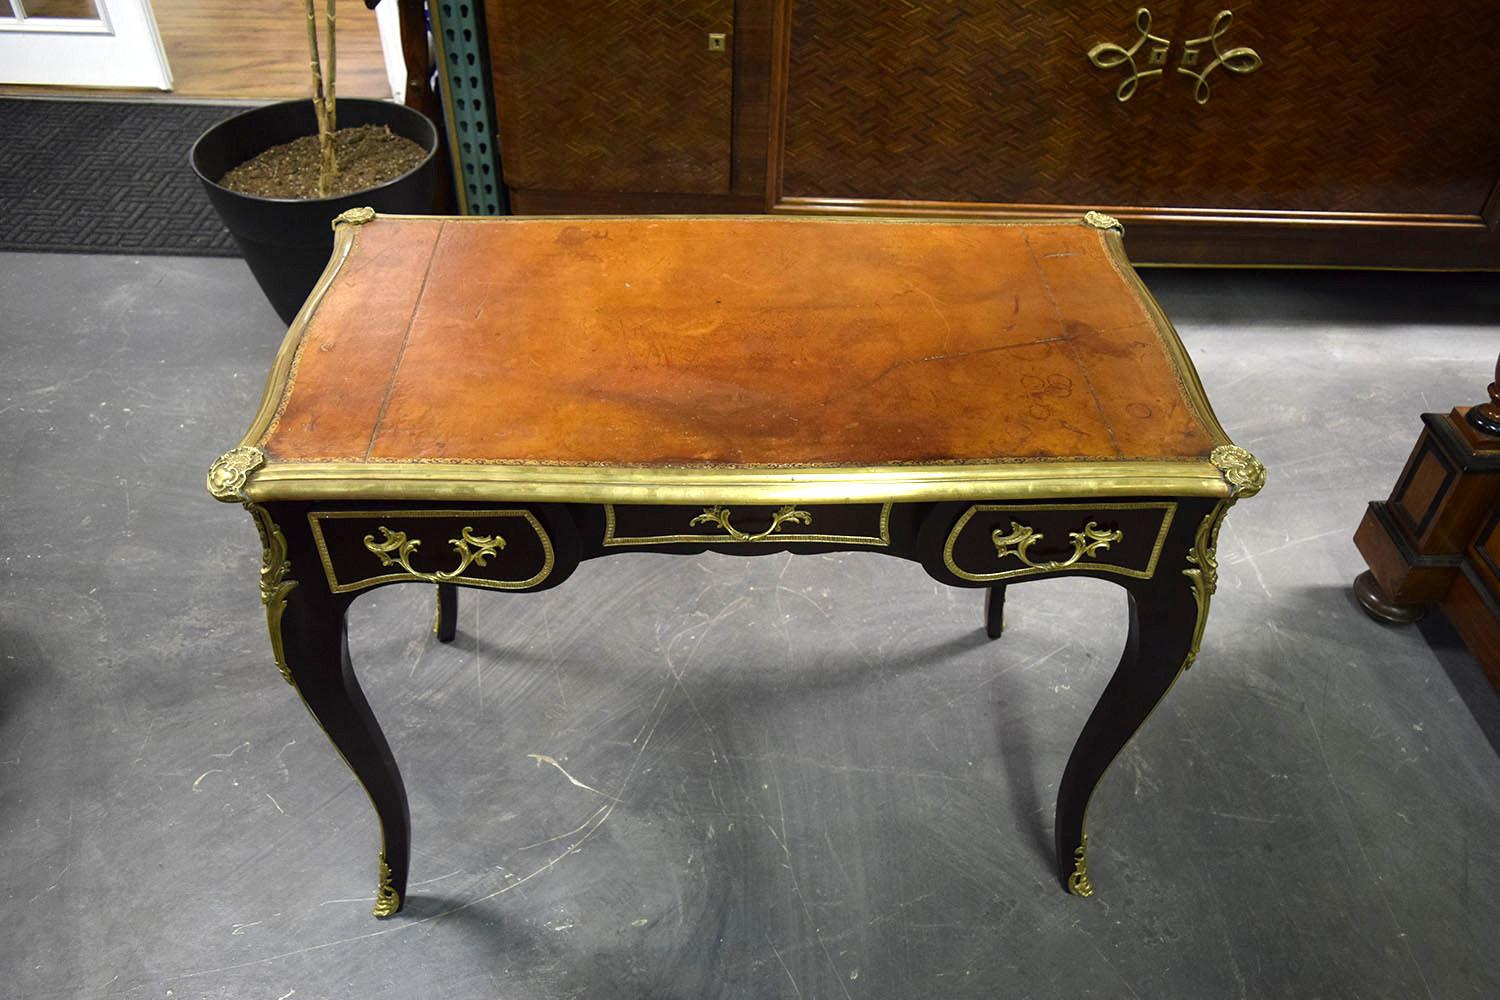 This 1900s French Louis XV-style desk is made of mahogany wood stained a deep mahogany color with a polished finish. The top of the desk is adorned with the original embossed leather with a natural patina and distressed finish. There are three